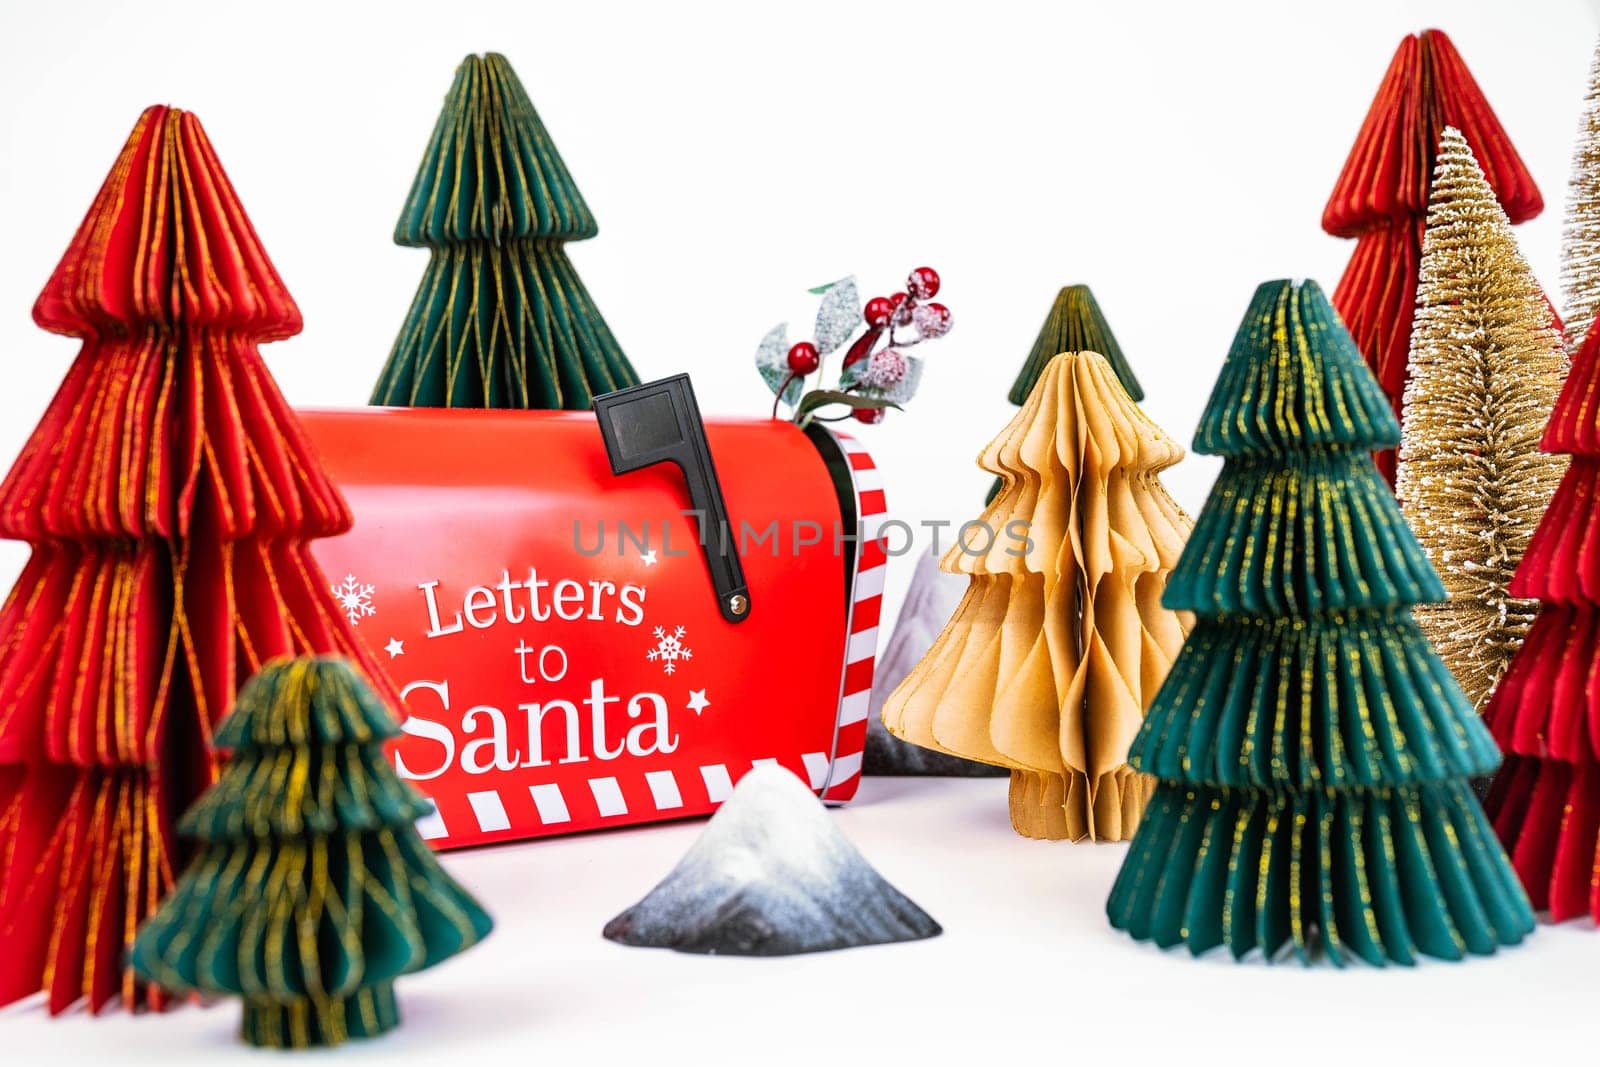 New Year's background for a product or card. Colored Christmas trees, Santa Claus mailbox. by tewolf